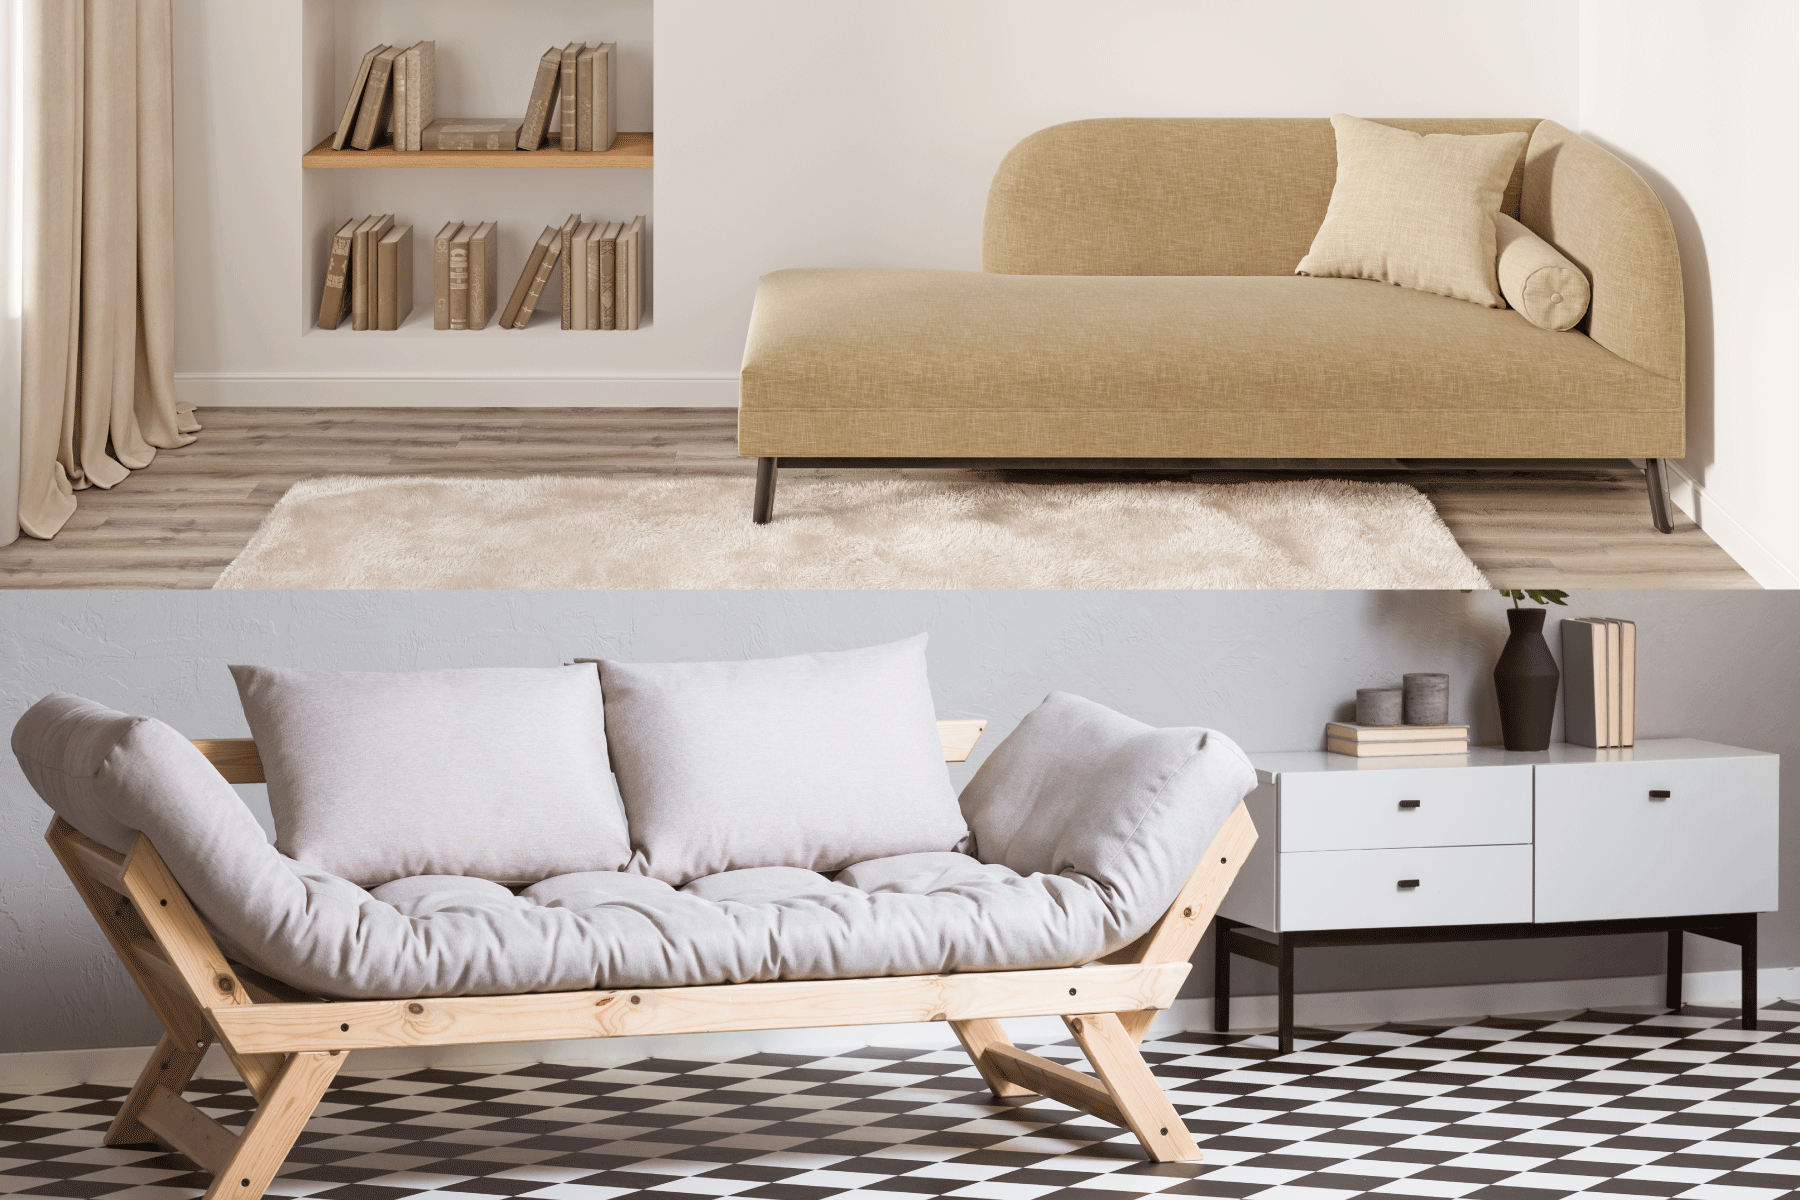 A collage photo of a futon and daybed